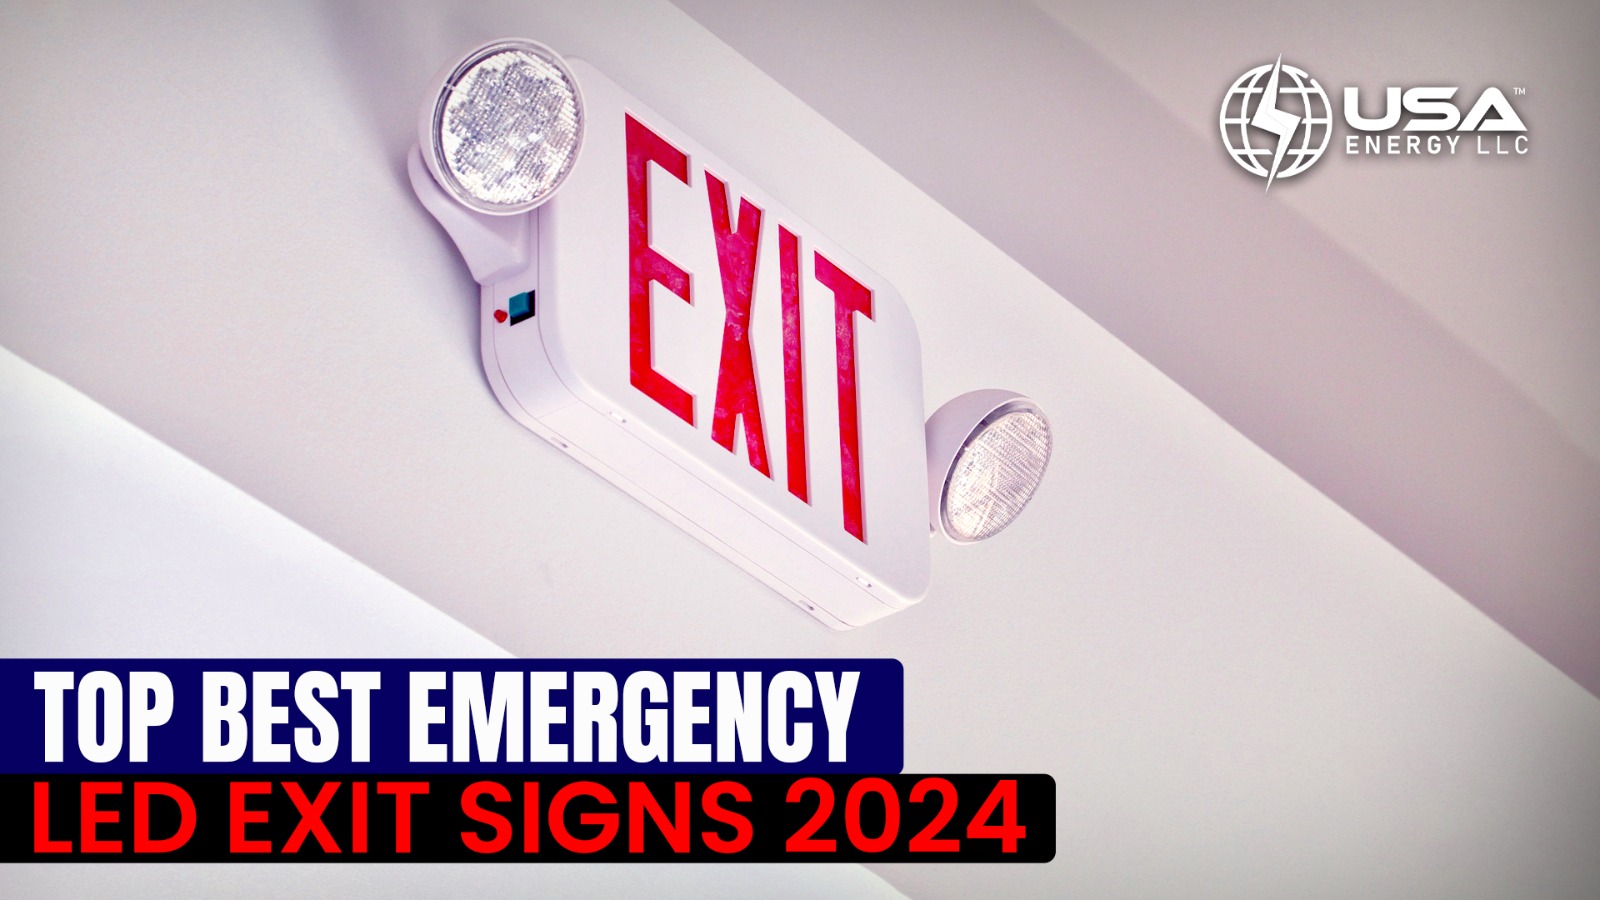 Top Best Emergency LED Exit Signs 2024